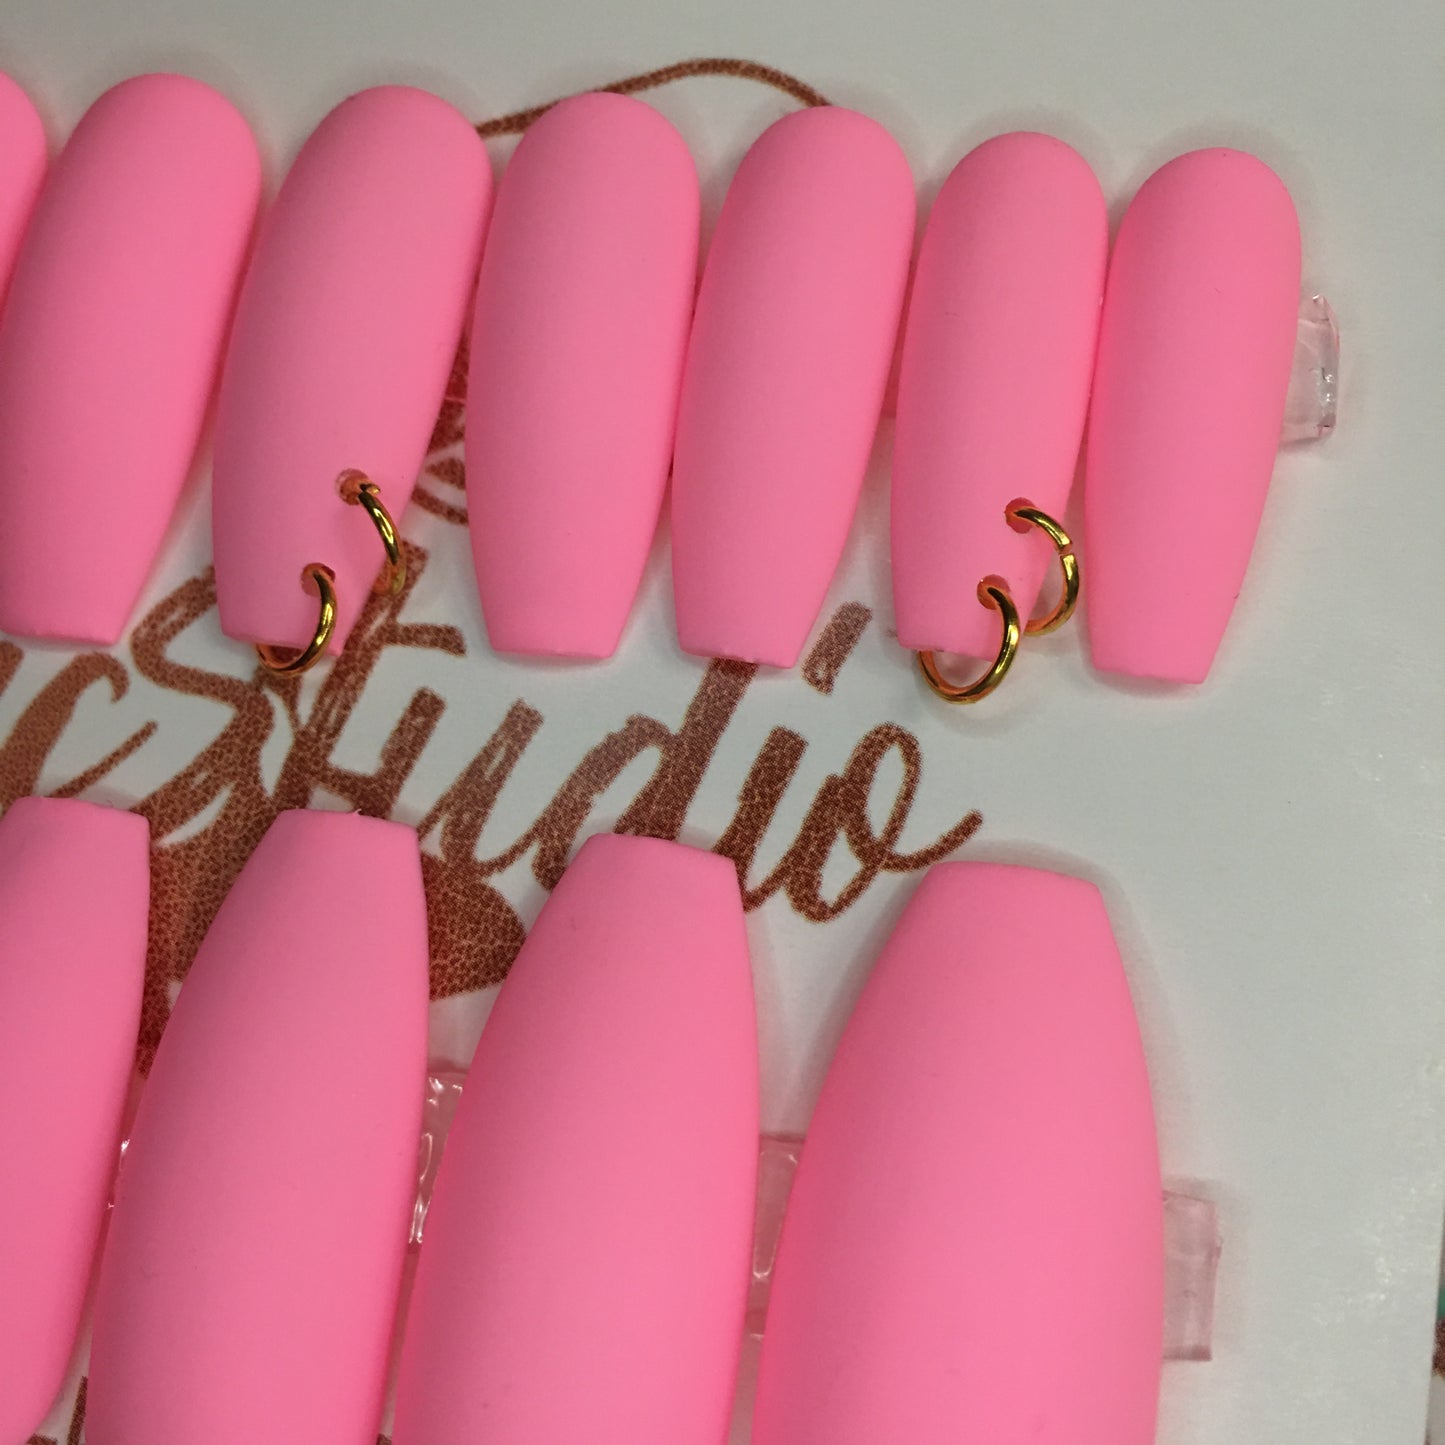 Bubble Gum | Long Coffin | Press on Nails | READY TO SHIP